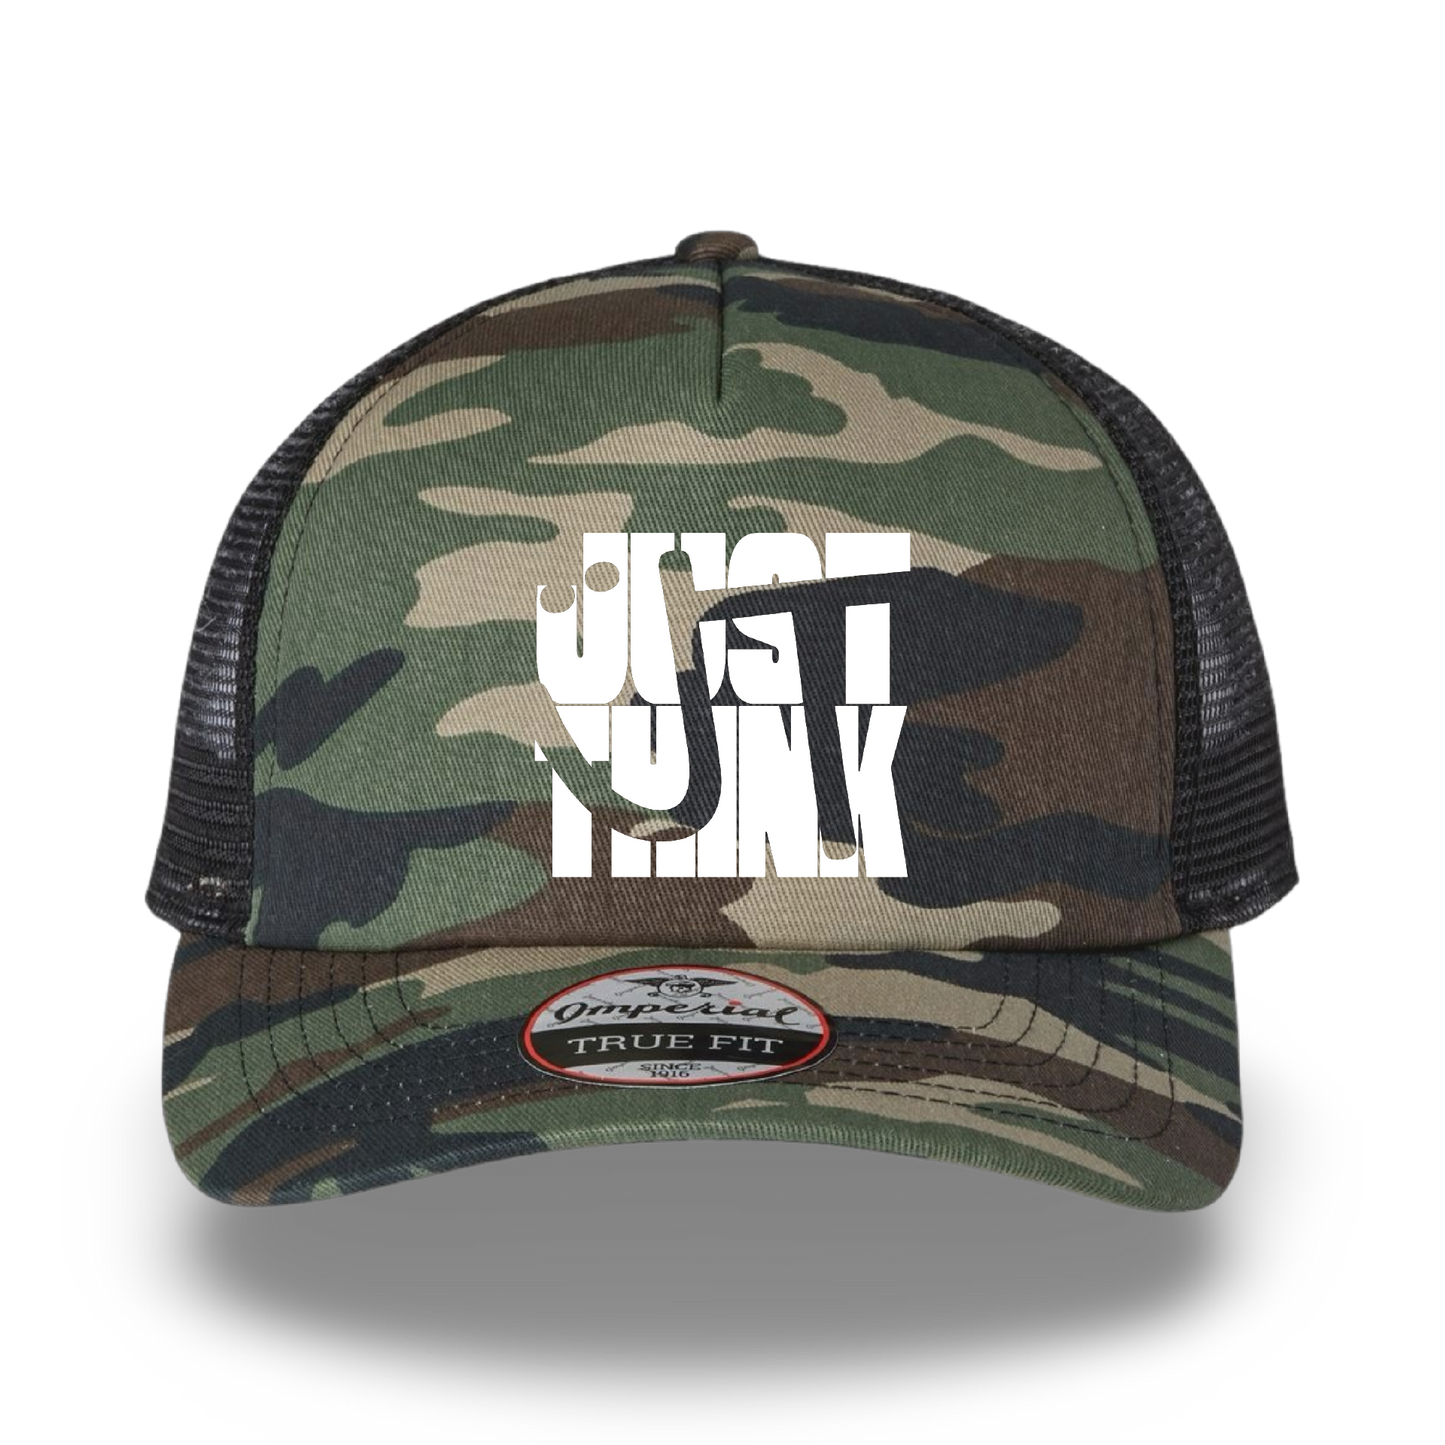 The Mashup (Trucker Hat x Imperial)